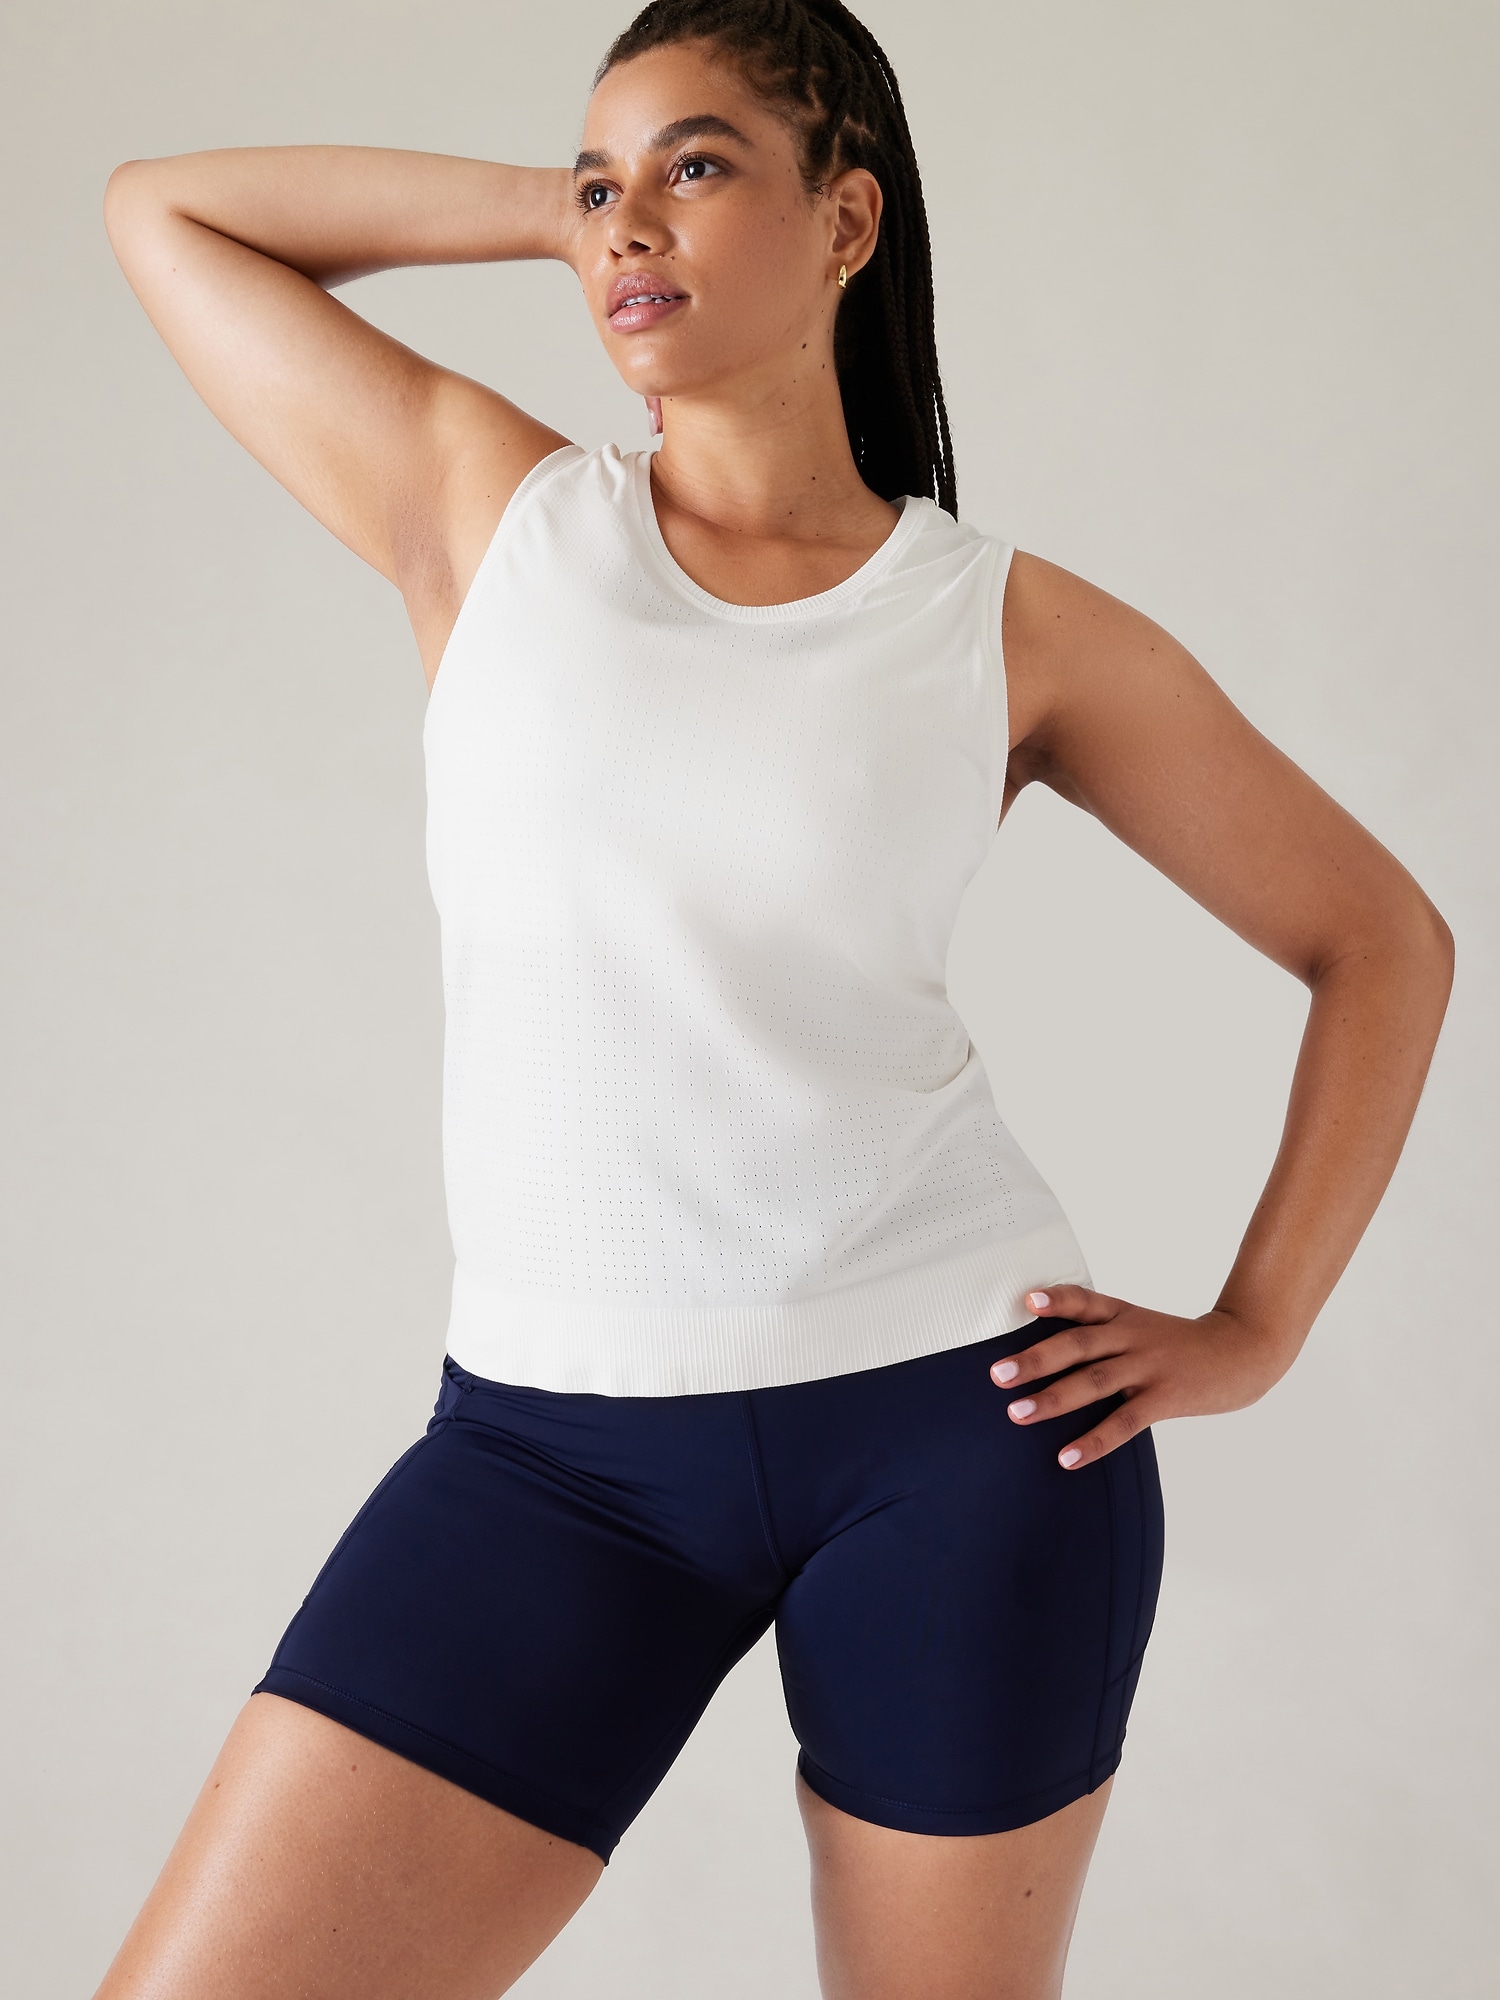 All In Motion Activewear Size M - $9 - From Celeste